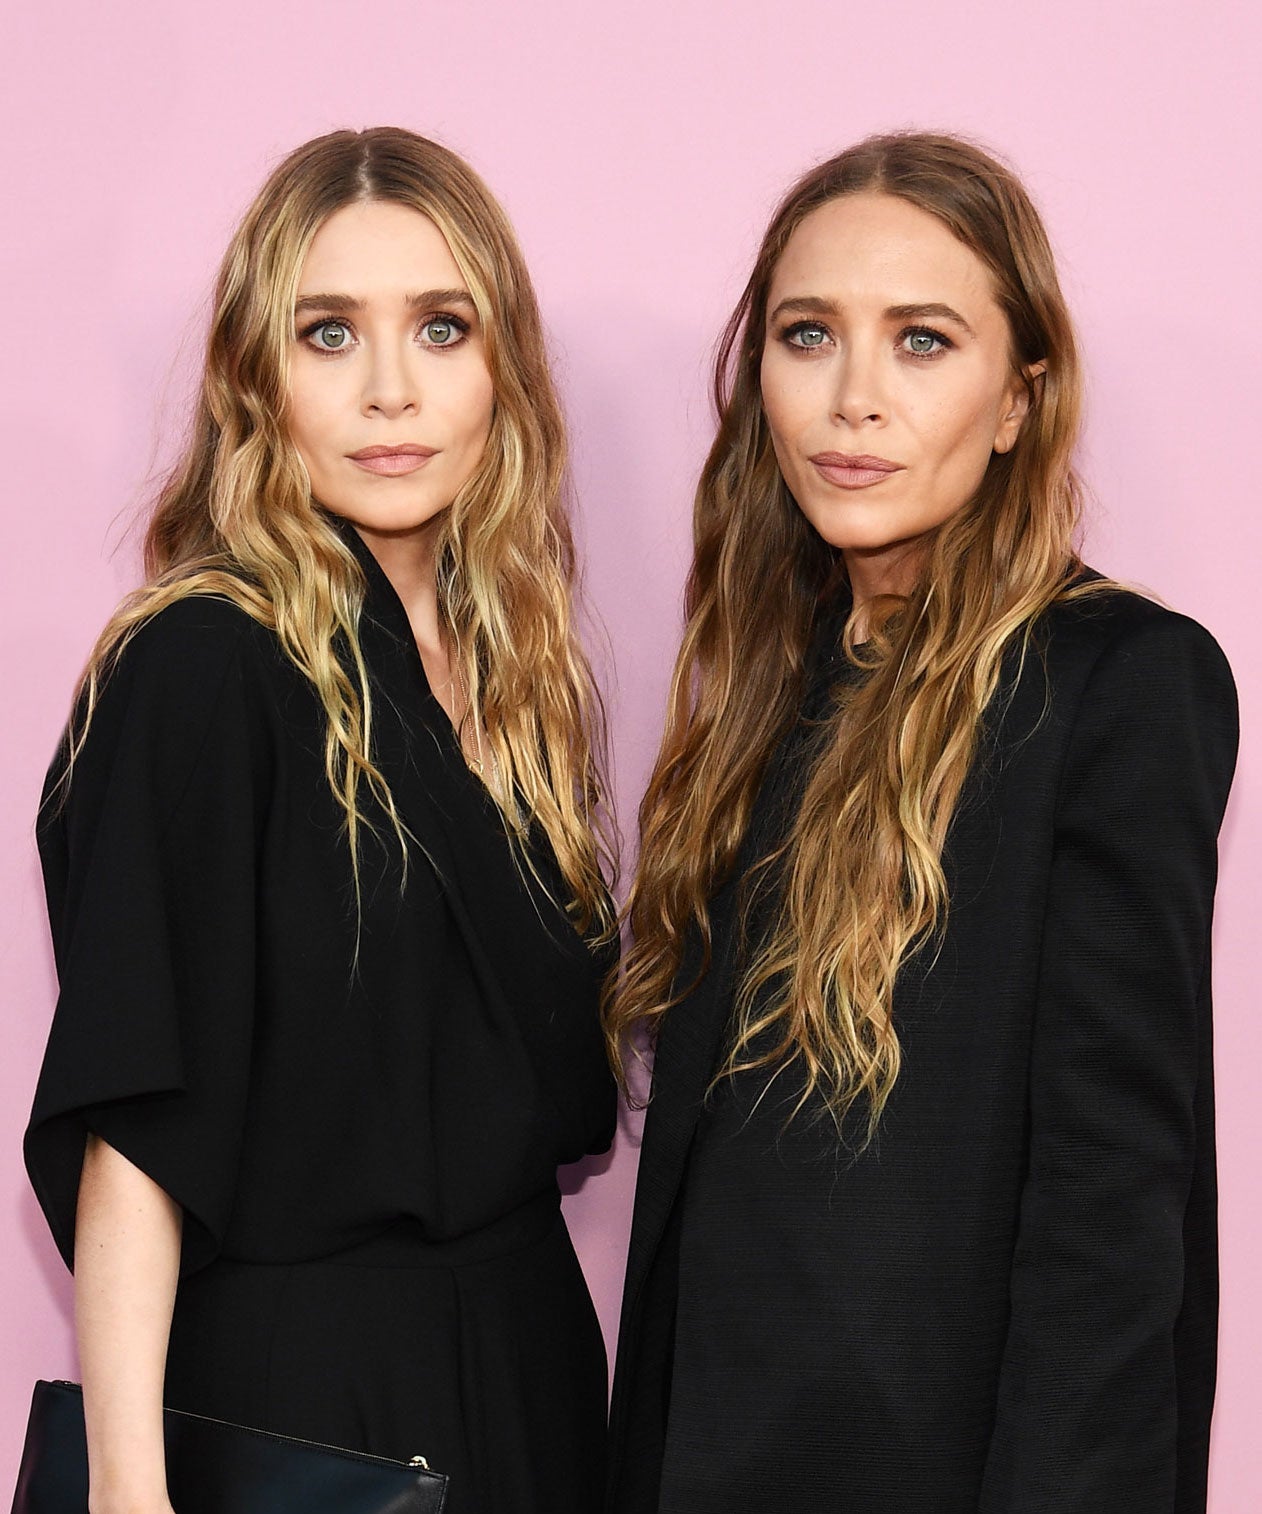 List 95+ Background Images Do The Olsen Twins Have A Sister Updated